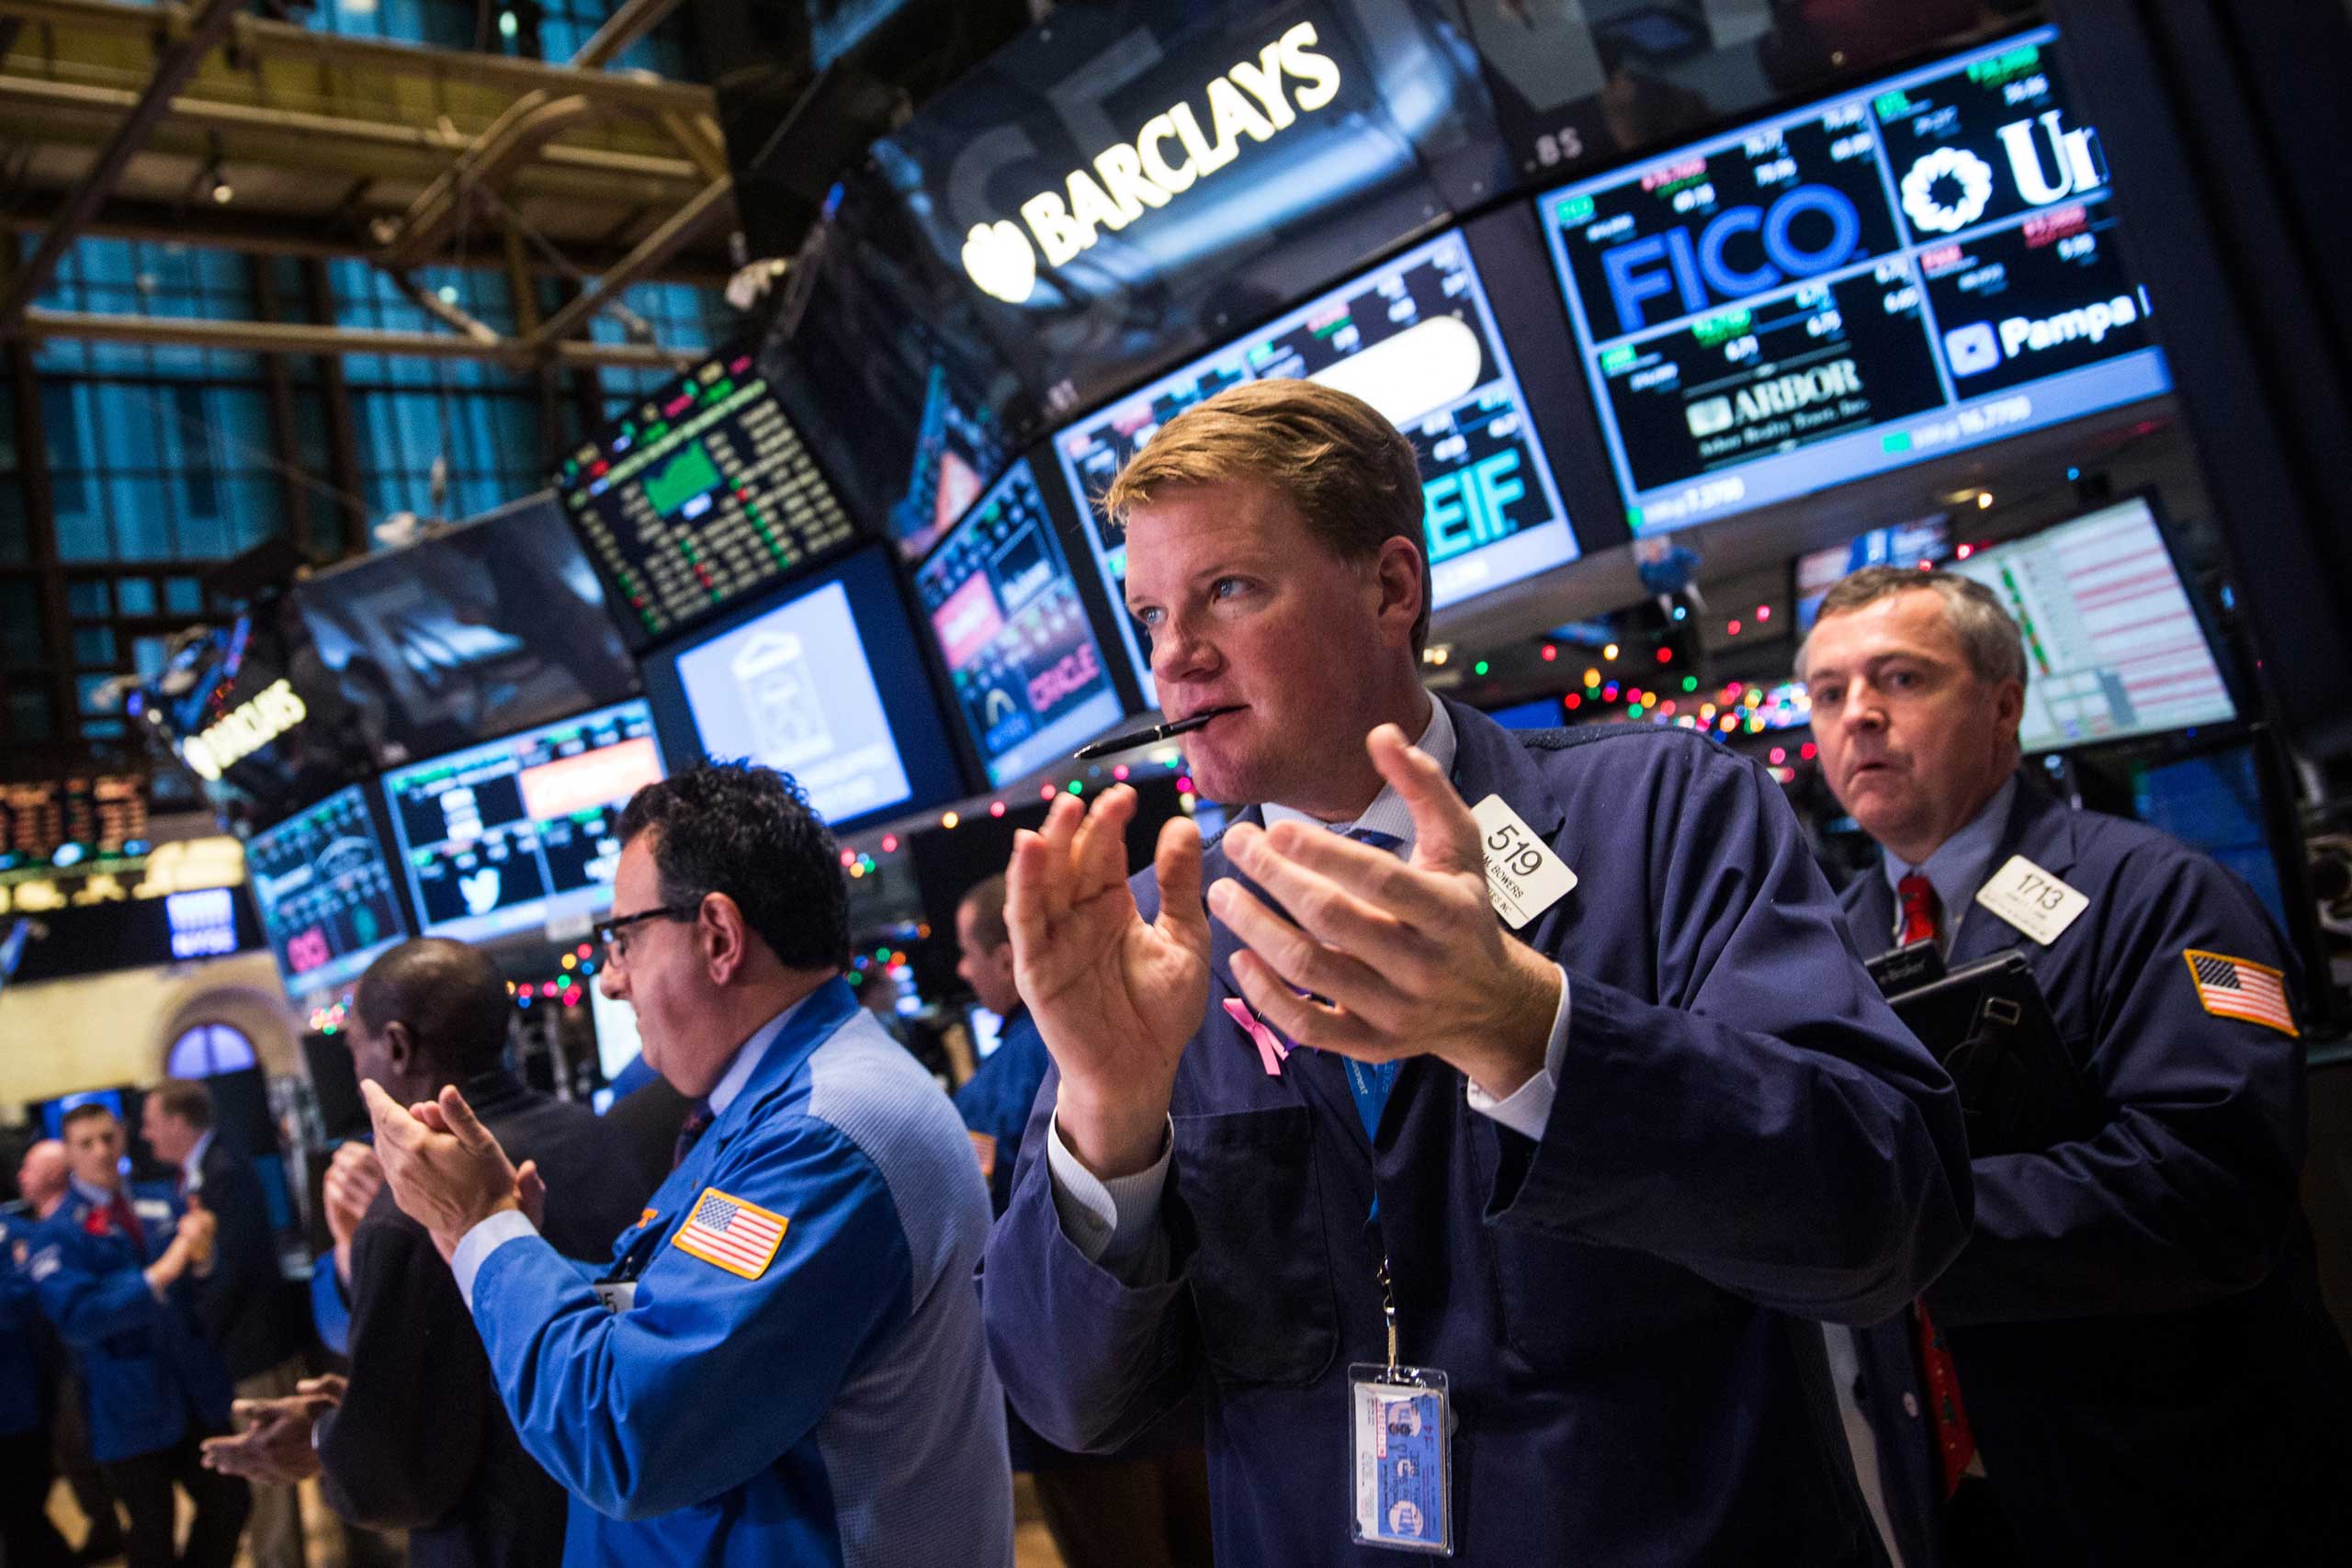 Traders work on the floor of the New York Stock Exchange in Nwe York City on Dec. 18, 2014. (Andrew Burton—Getty Images)